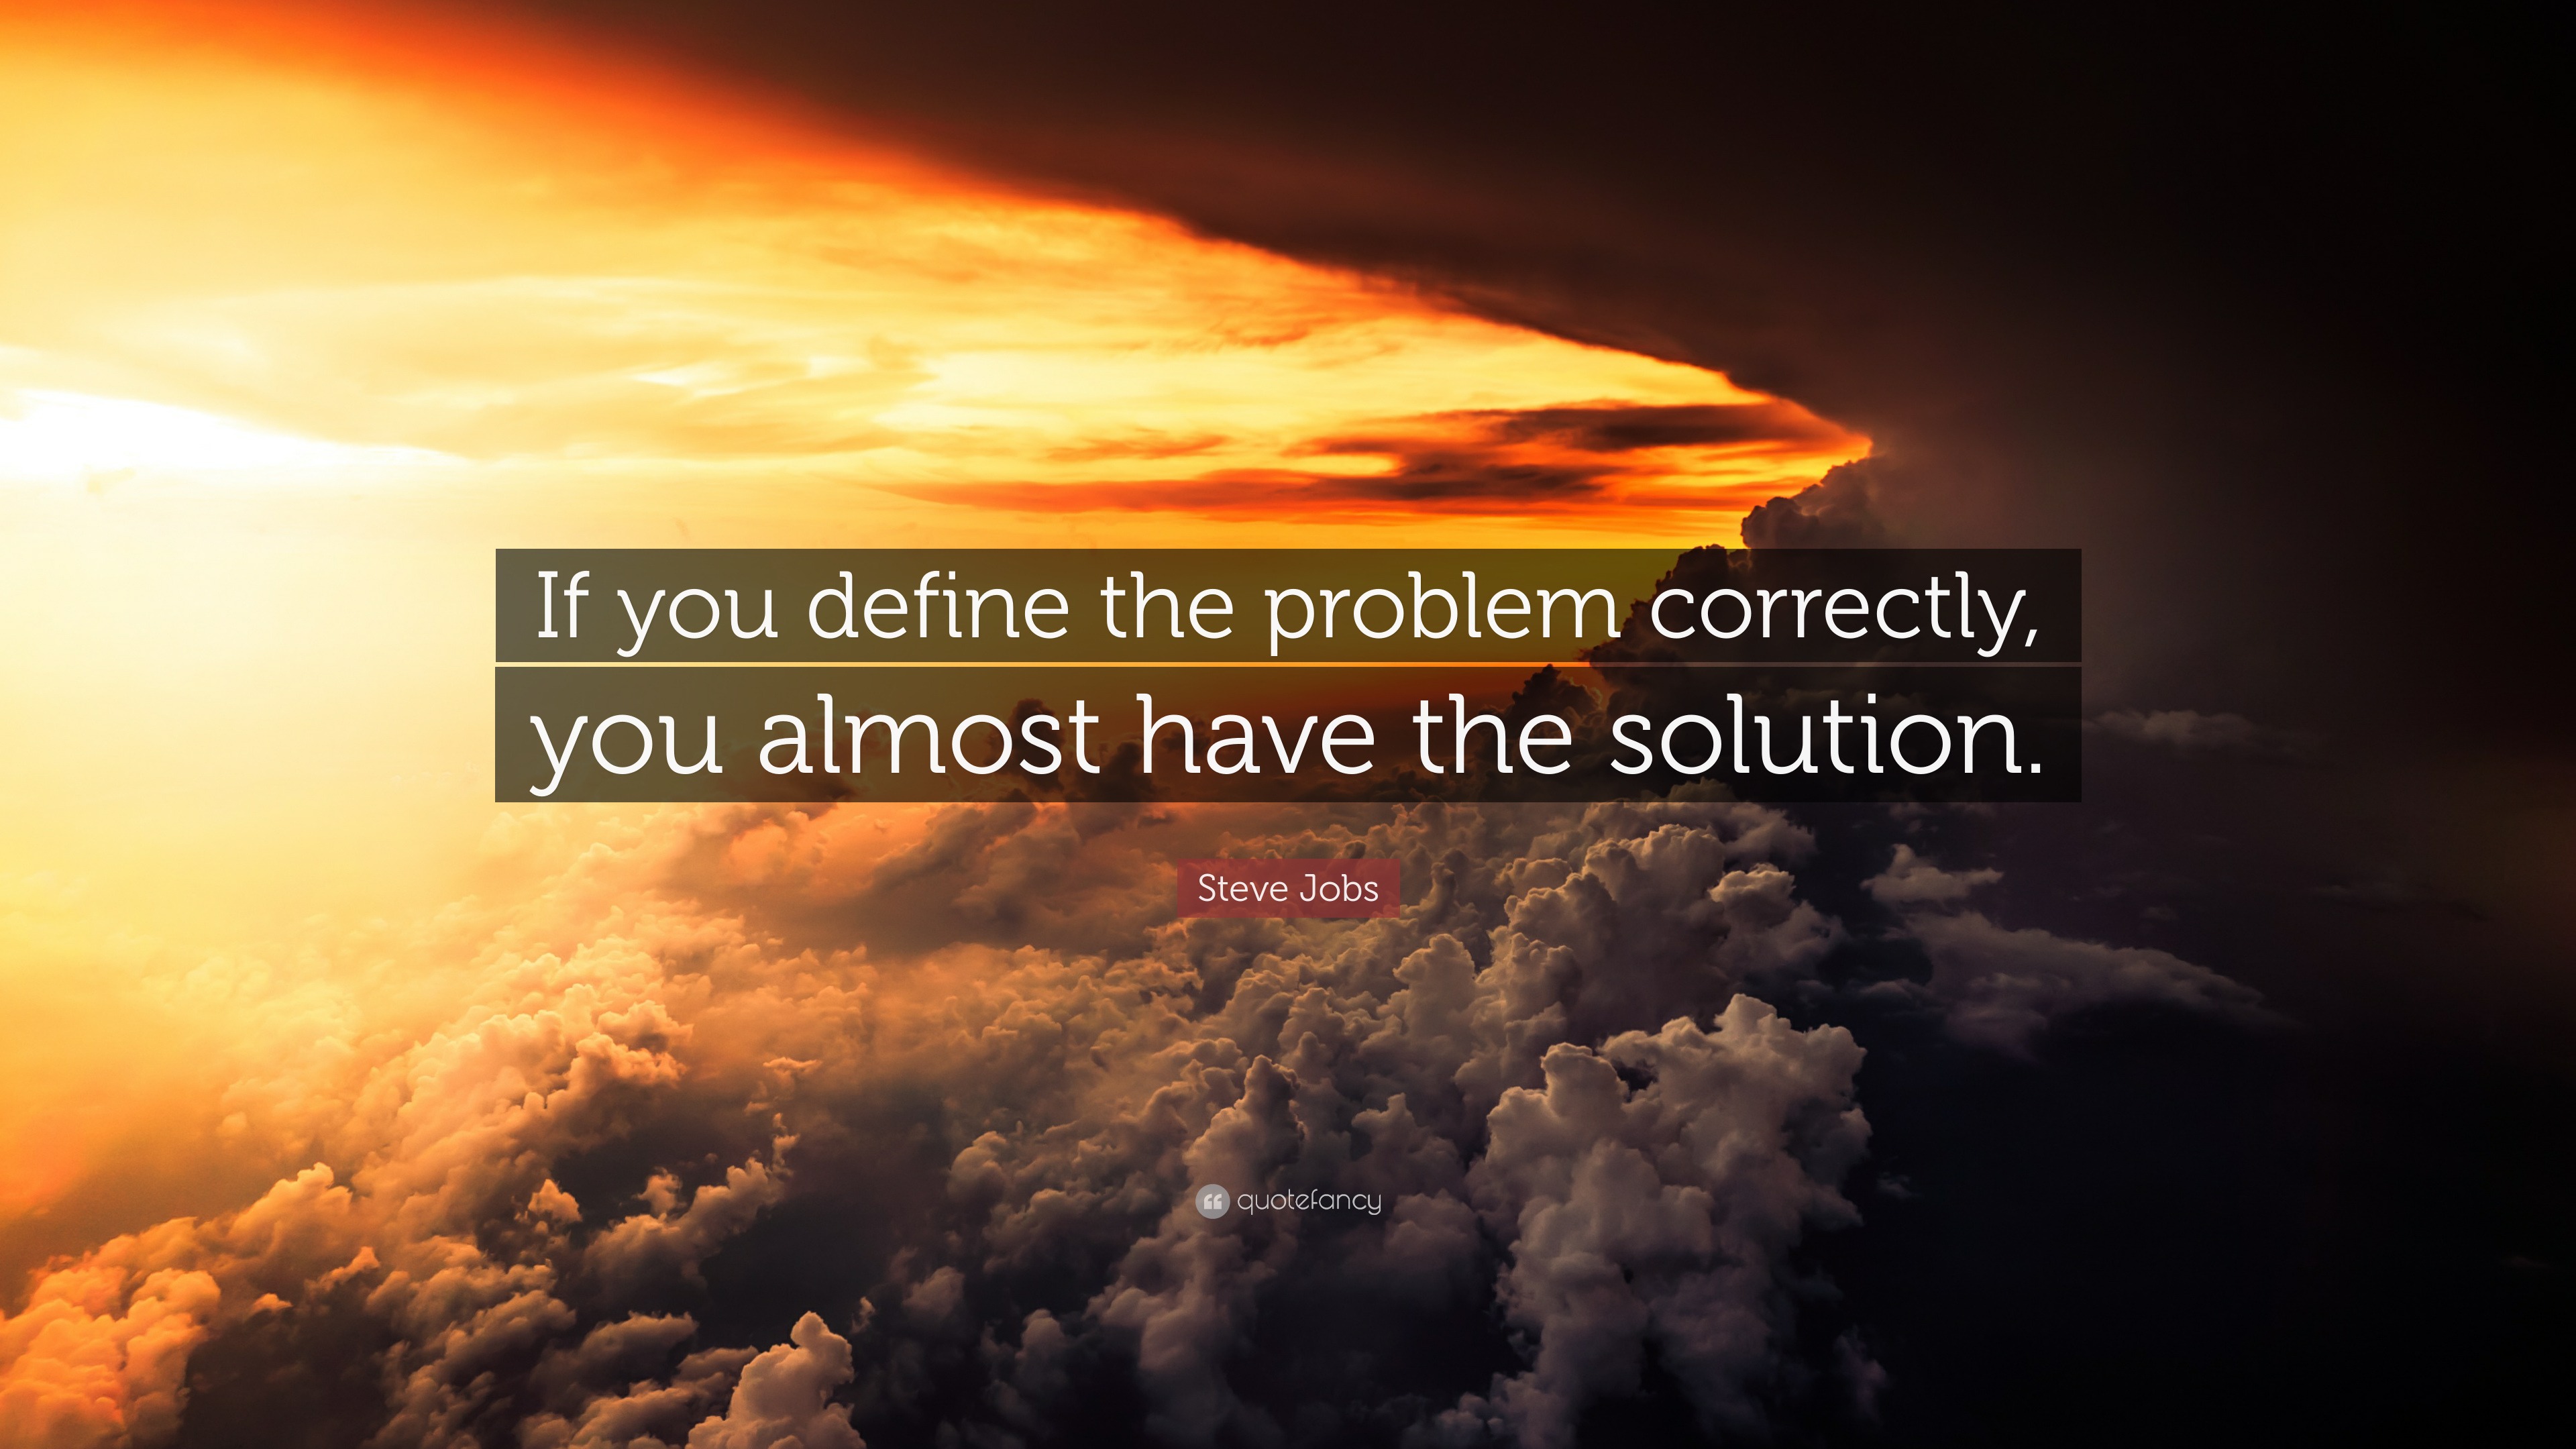 Steve Jobs Quote: “If you define the problem correctly, you almost